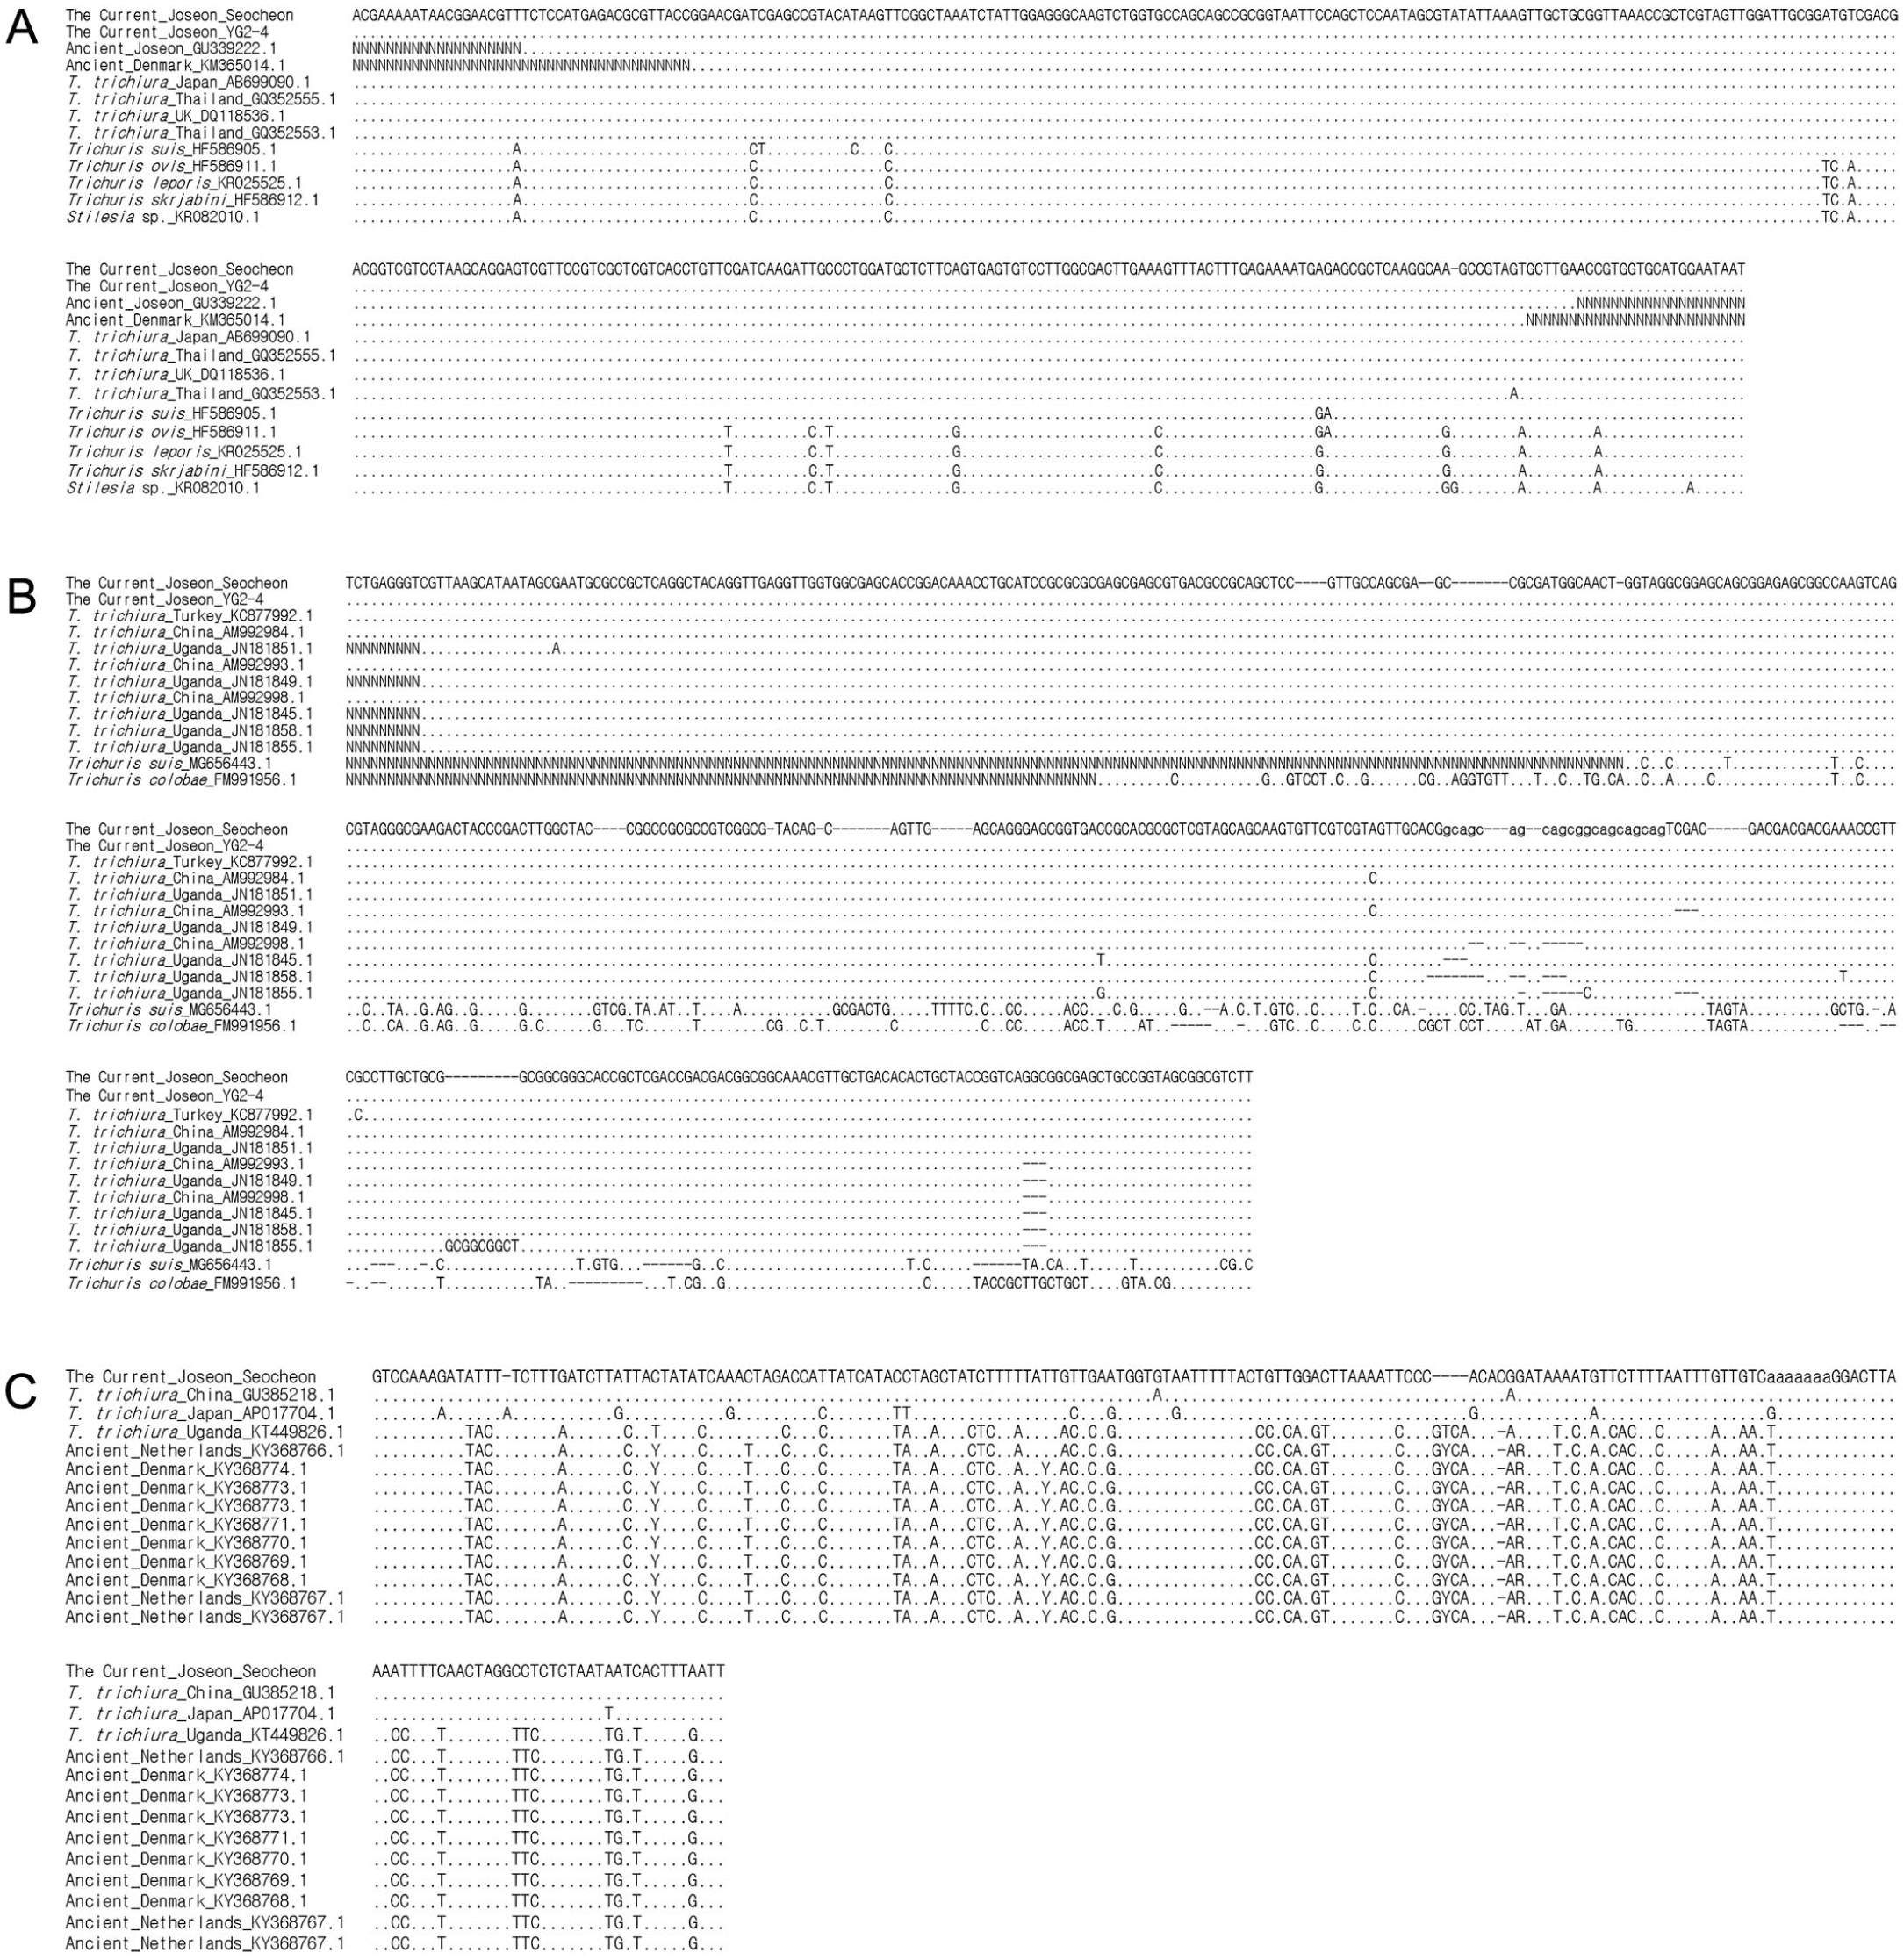 Genetic Analysis Of Small Subunit Ribosomal Rna Internal Transcribed Spacer 2 And Atp Synthase Subunit 8 Of Trichuris Trichiura Ancient Dna Retrieved From The 15th To 18th Century Joseon Dynasty Mummies Coprolites From